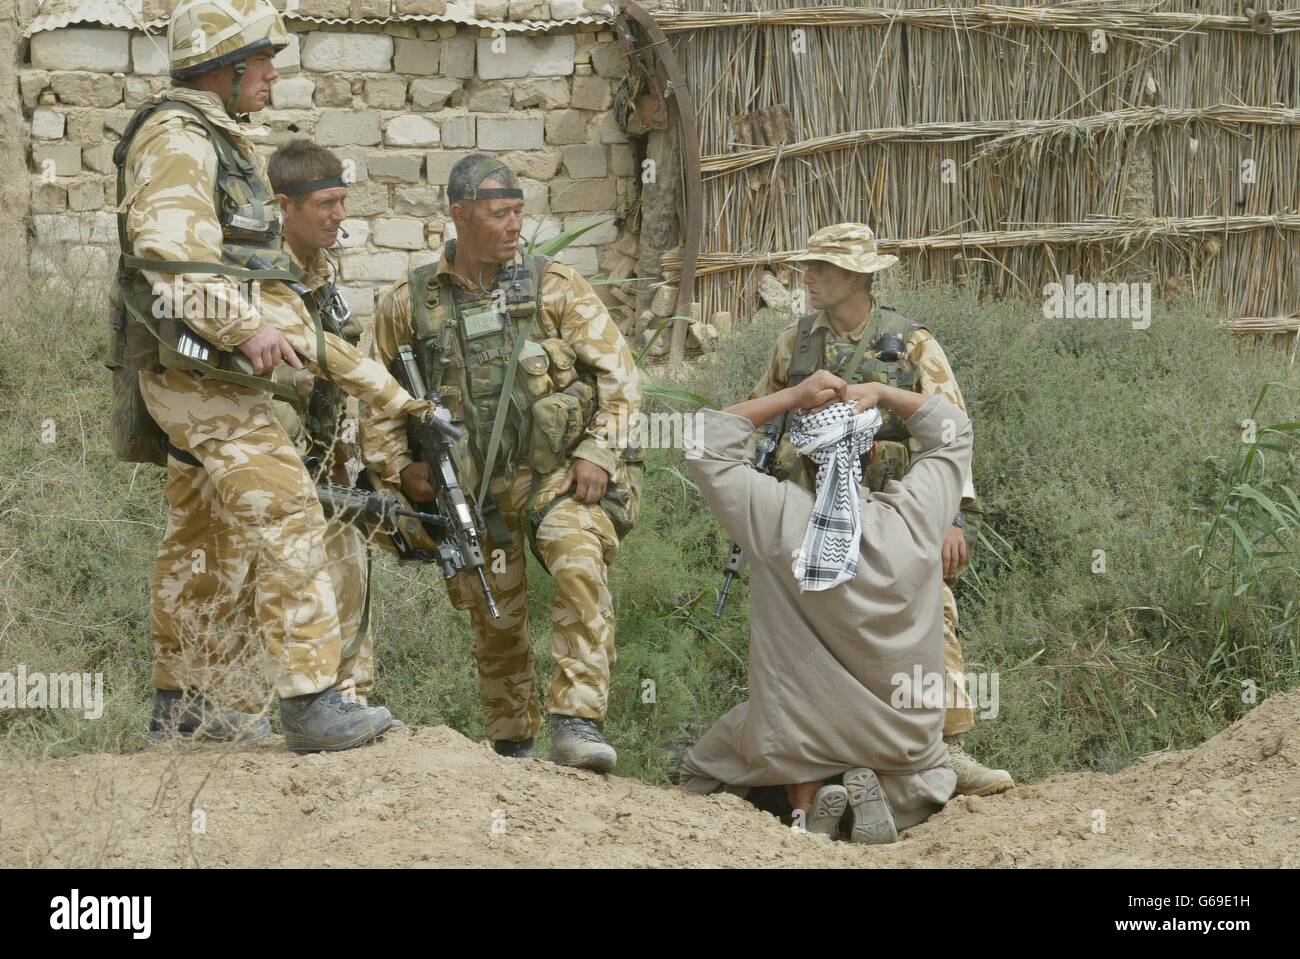 Men from 40 Commando Royal Marines take a prisoner, believed to be Iraqi army who provided them with information on the location of the Ba'ath Party headquarters in the town of Al Faw in Southern Iraq. Stock Photo